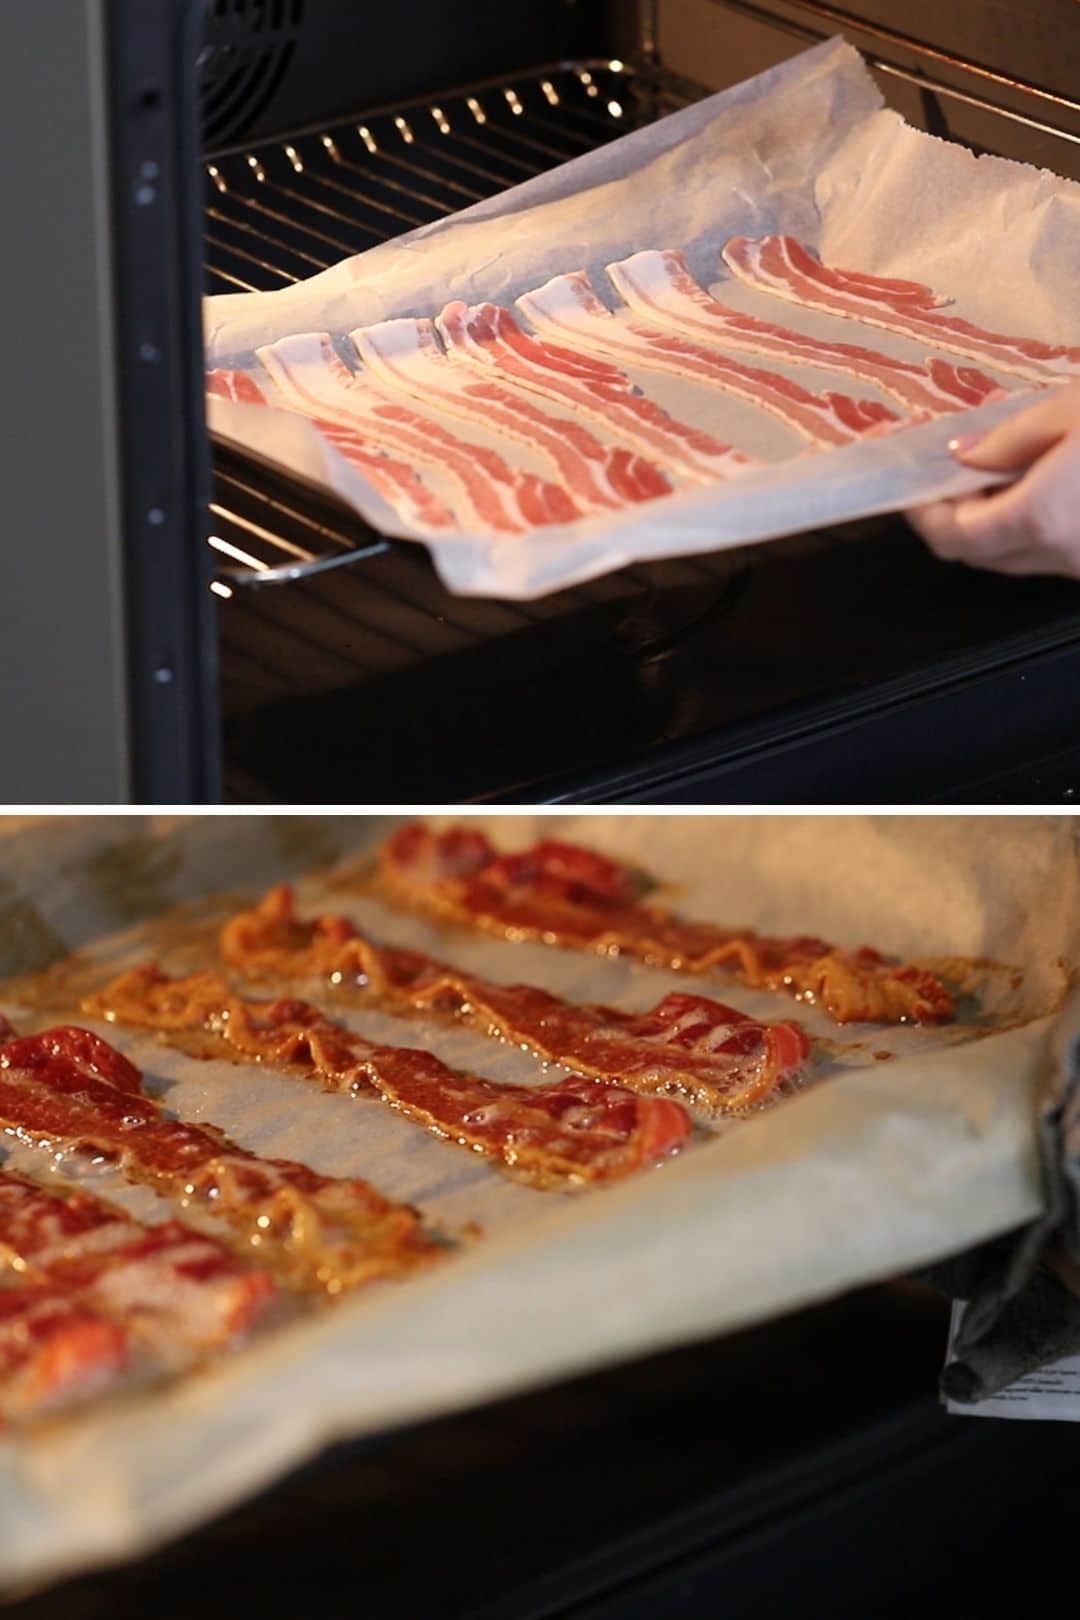 https://www.lowcarbspark.com/wp-content/uploads/2022/03/how-to-cook-bacon-in-the-oven-best-method.jpg